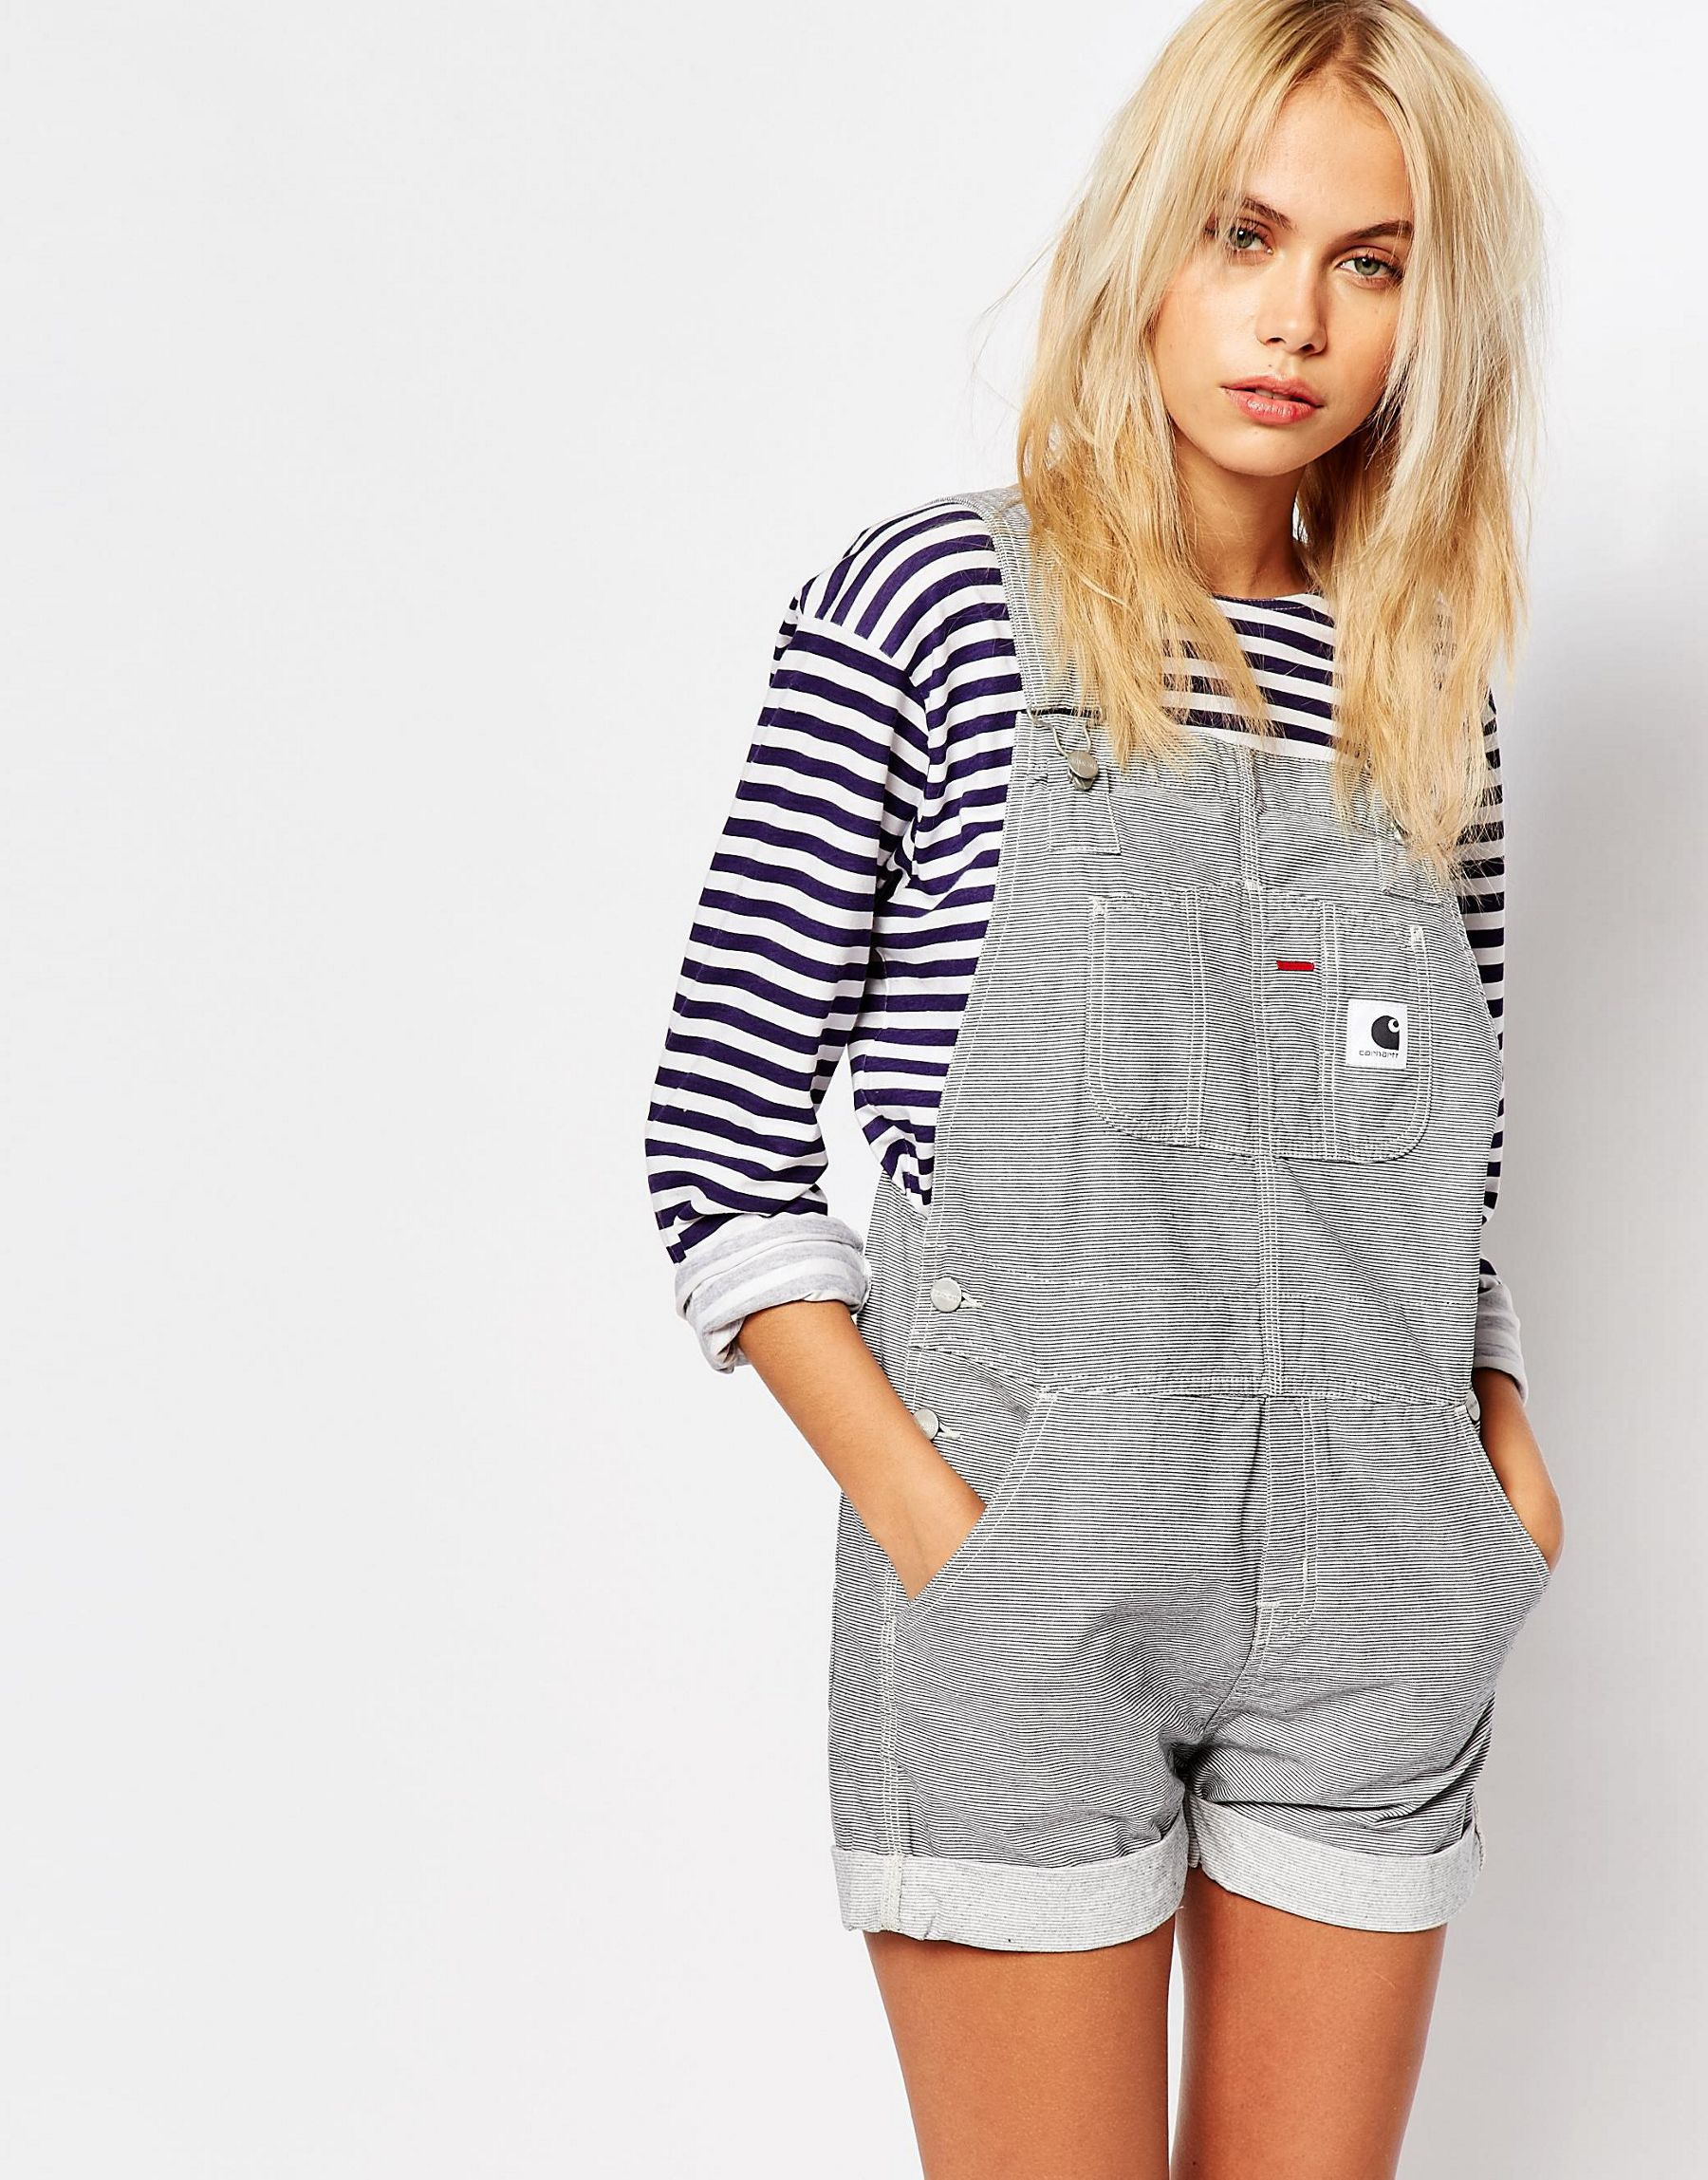 Carhartt WIP Carhartt Dungaree Playsuit In Hickory Stripe in Blue | Lyst